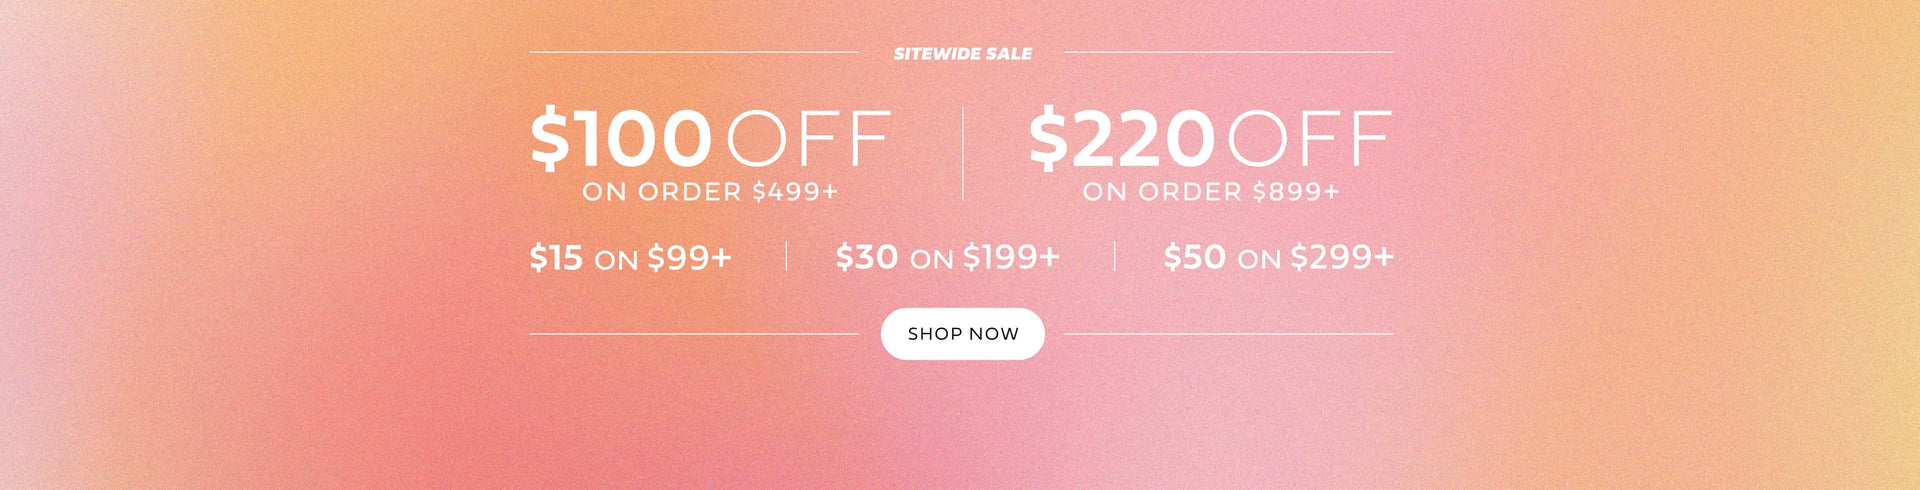 Cyber Monday Homepage Banner Second Half 